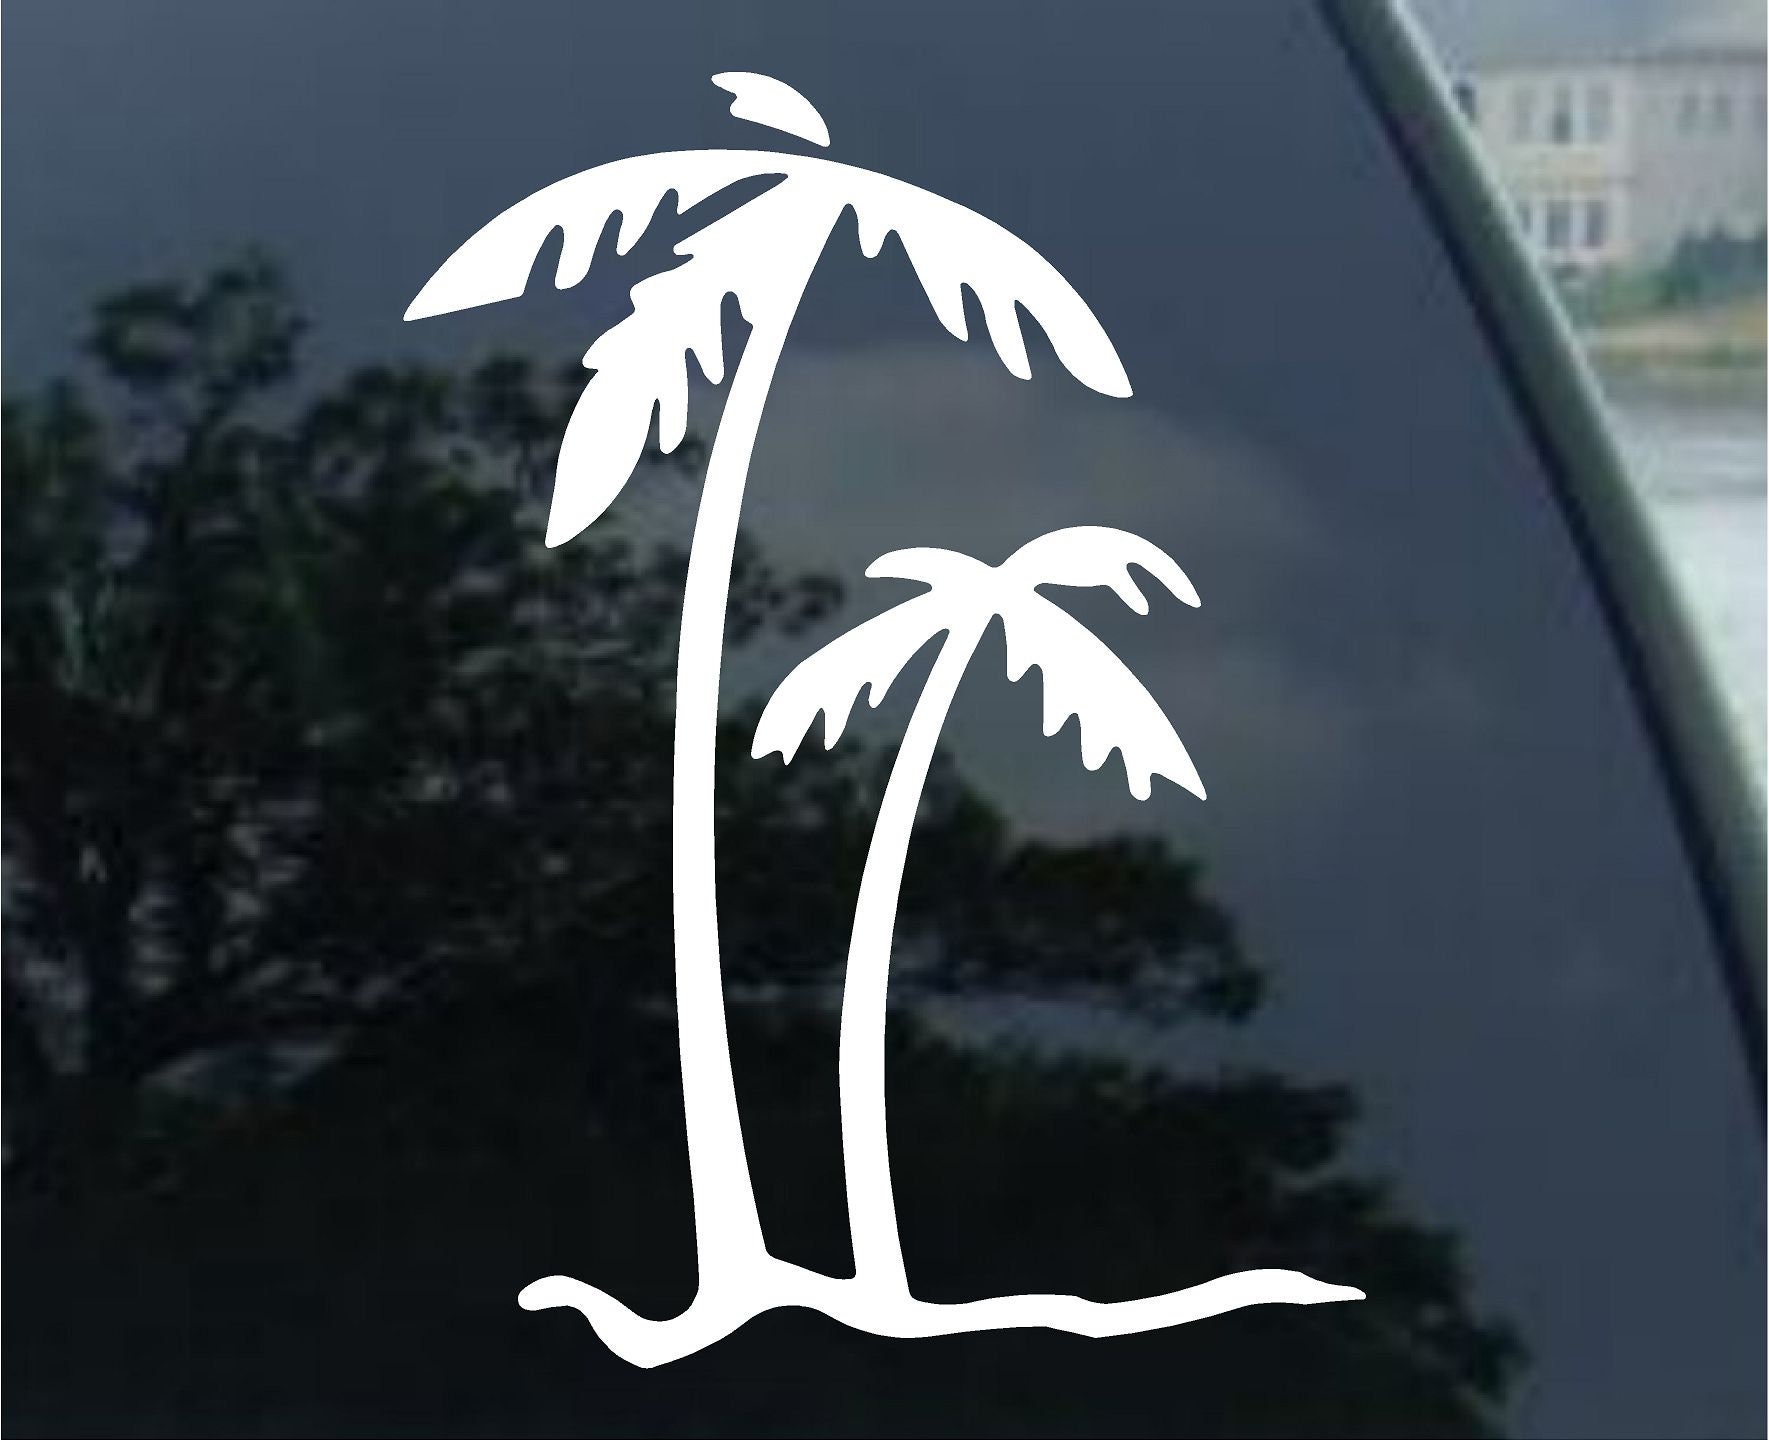 Palm Tree Sticker Illustration Waterproof - Buy Any 4 For $1.75 Each  Storewide!